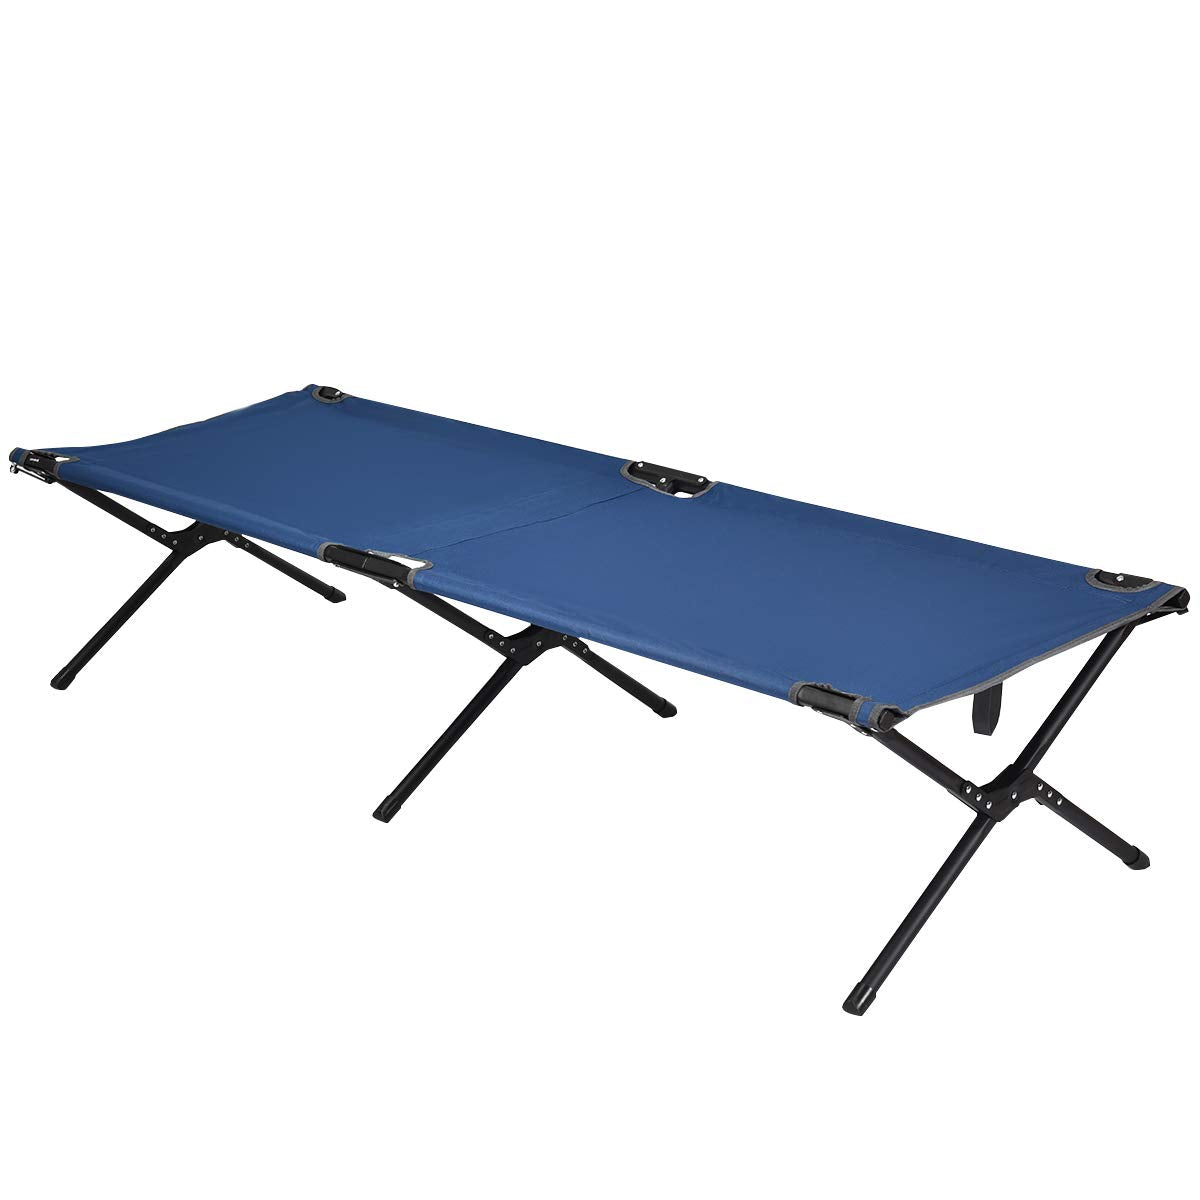 Folding Camping Cot with Carrying Bag - GoplusUS